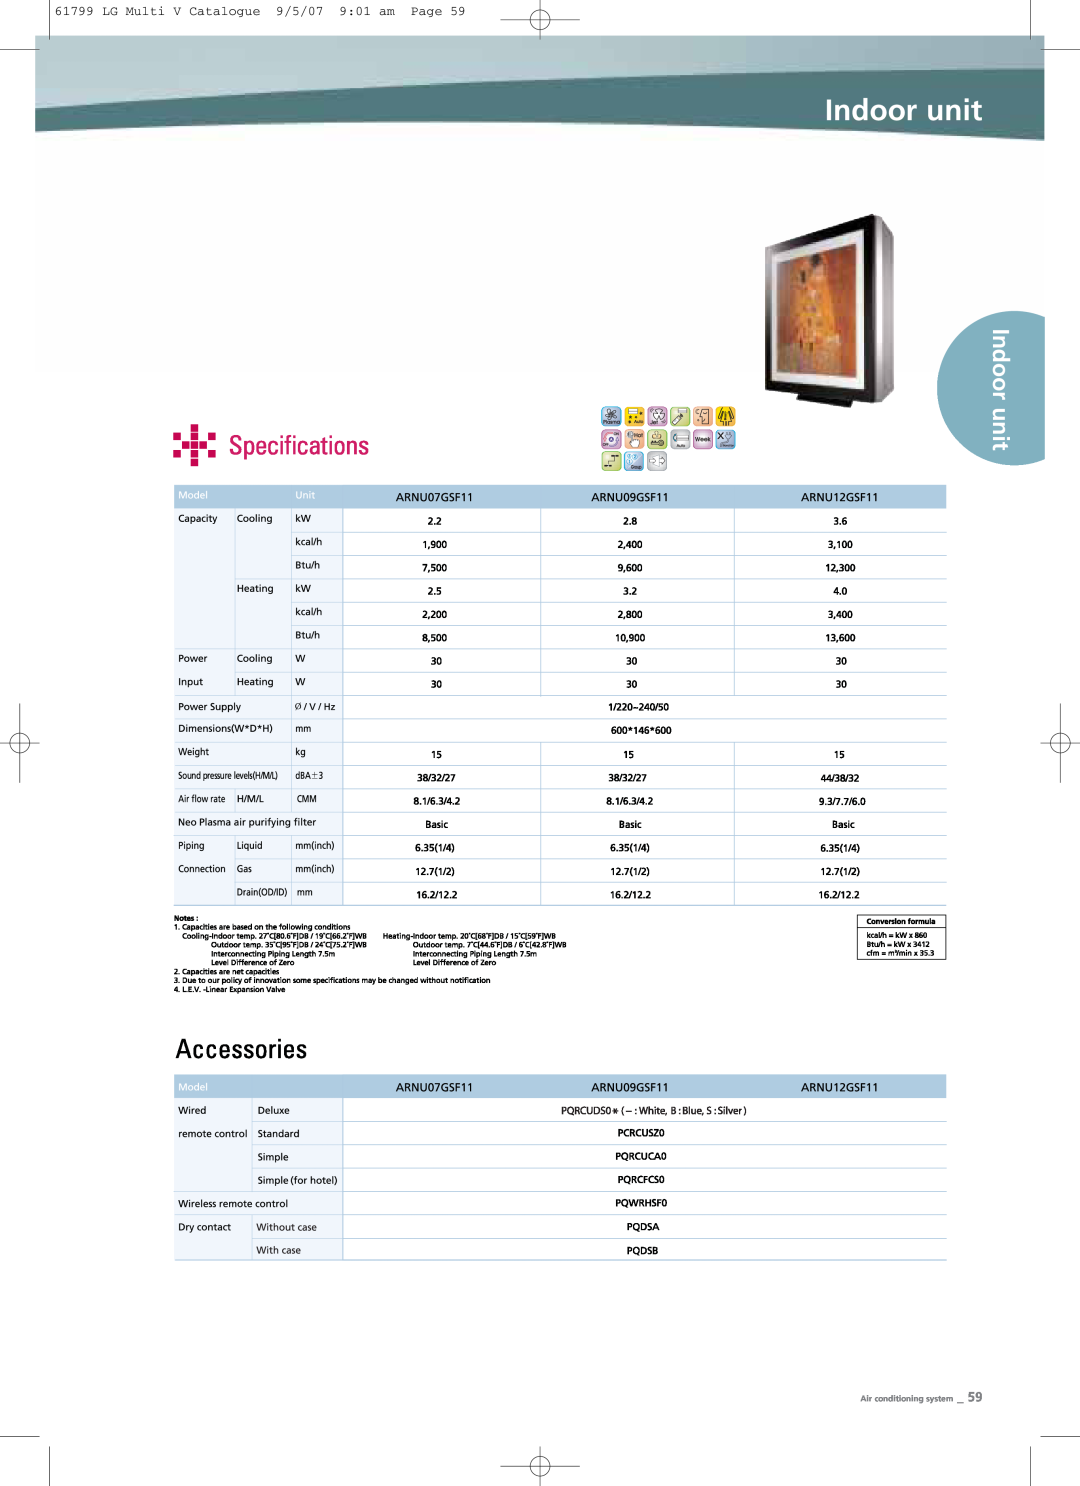 LG Electronics PRHR040 manual Specifications, Indoor unit, LG Multi V Catalogue 9/5/07 901 am Page, Air conditioning system 